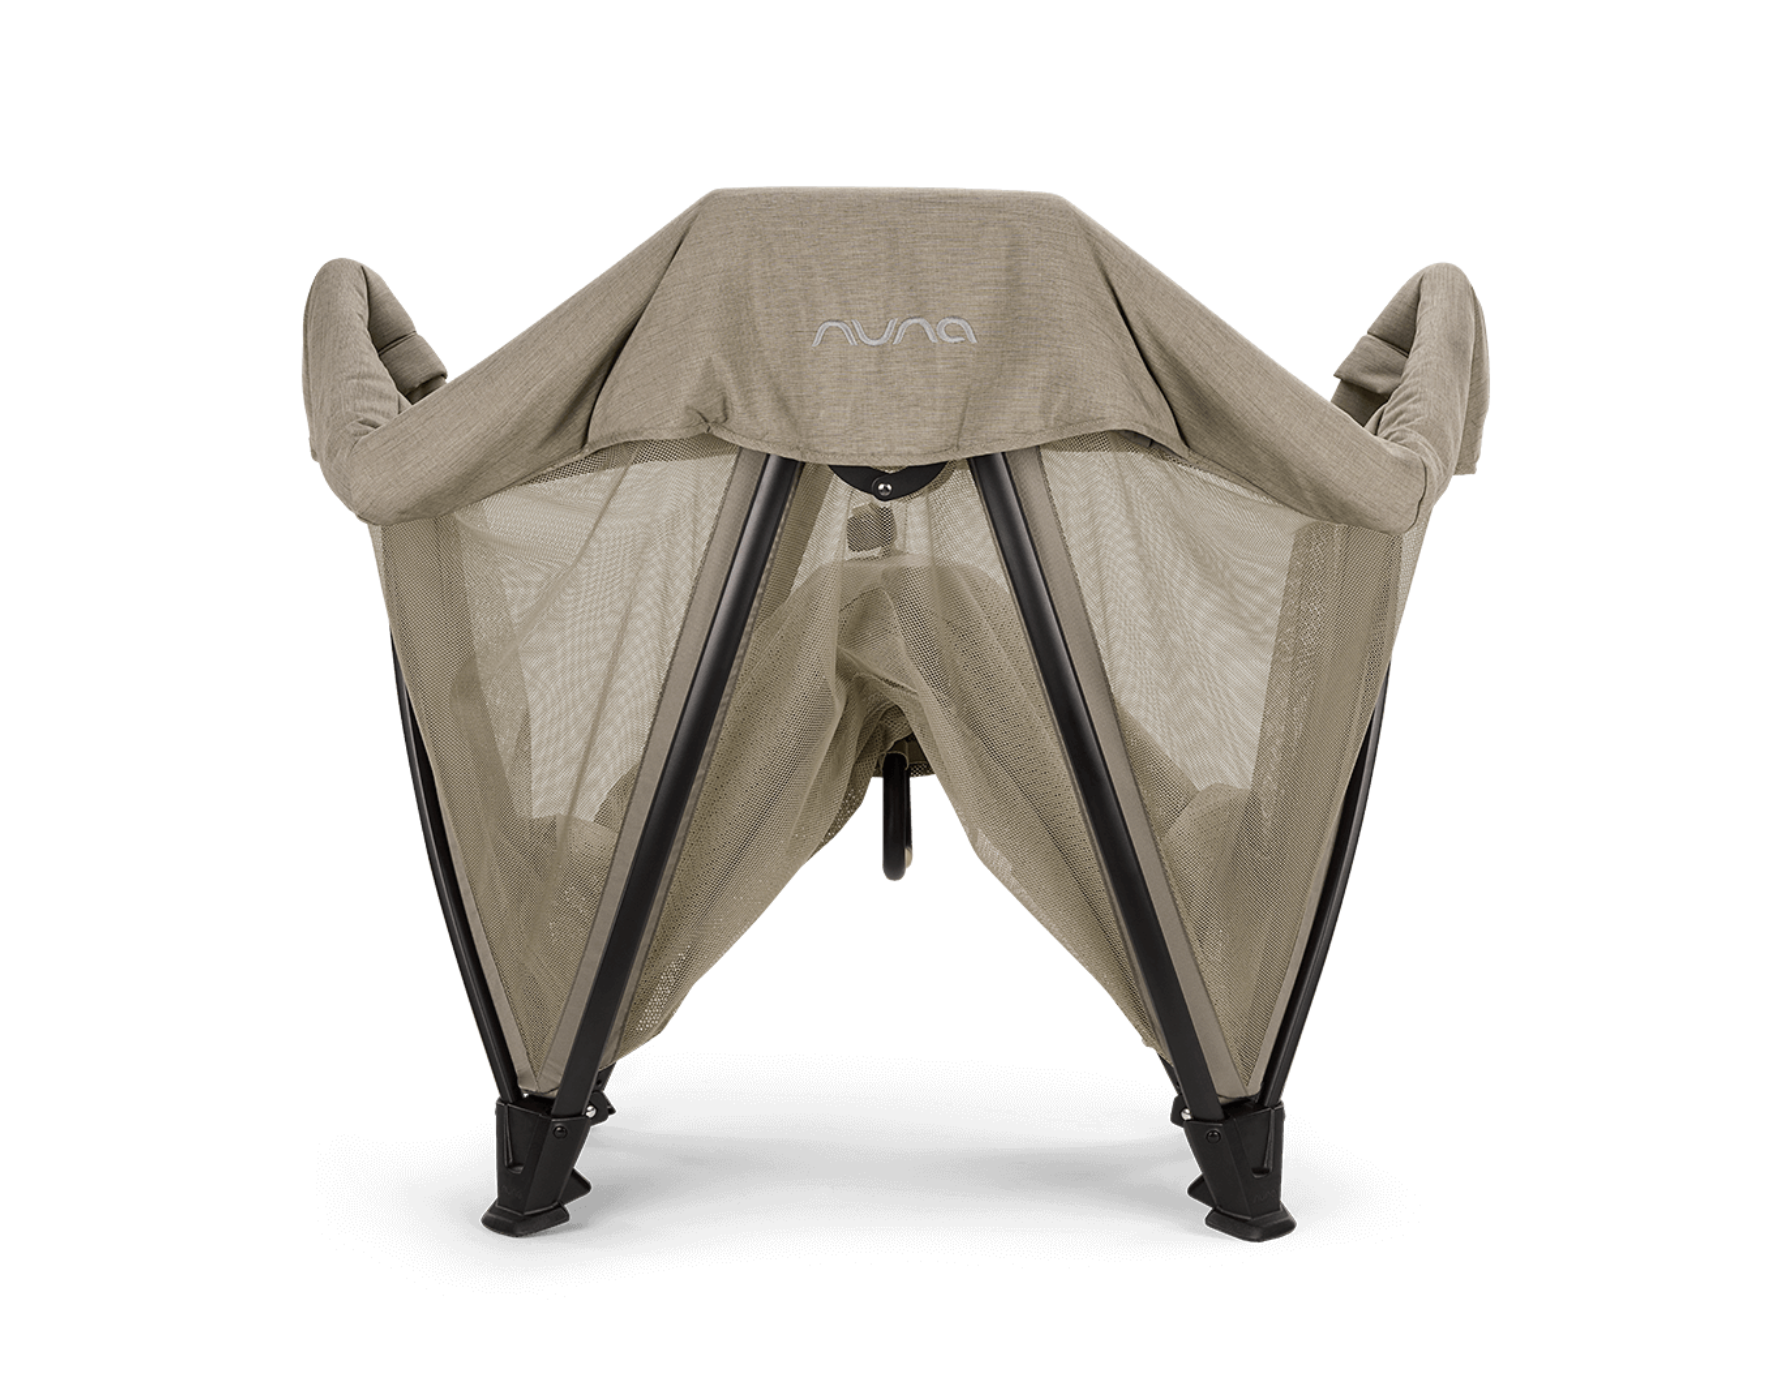 Sena Aire with New Zip-Off Bassinet - Hazelwood